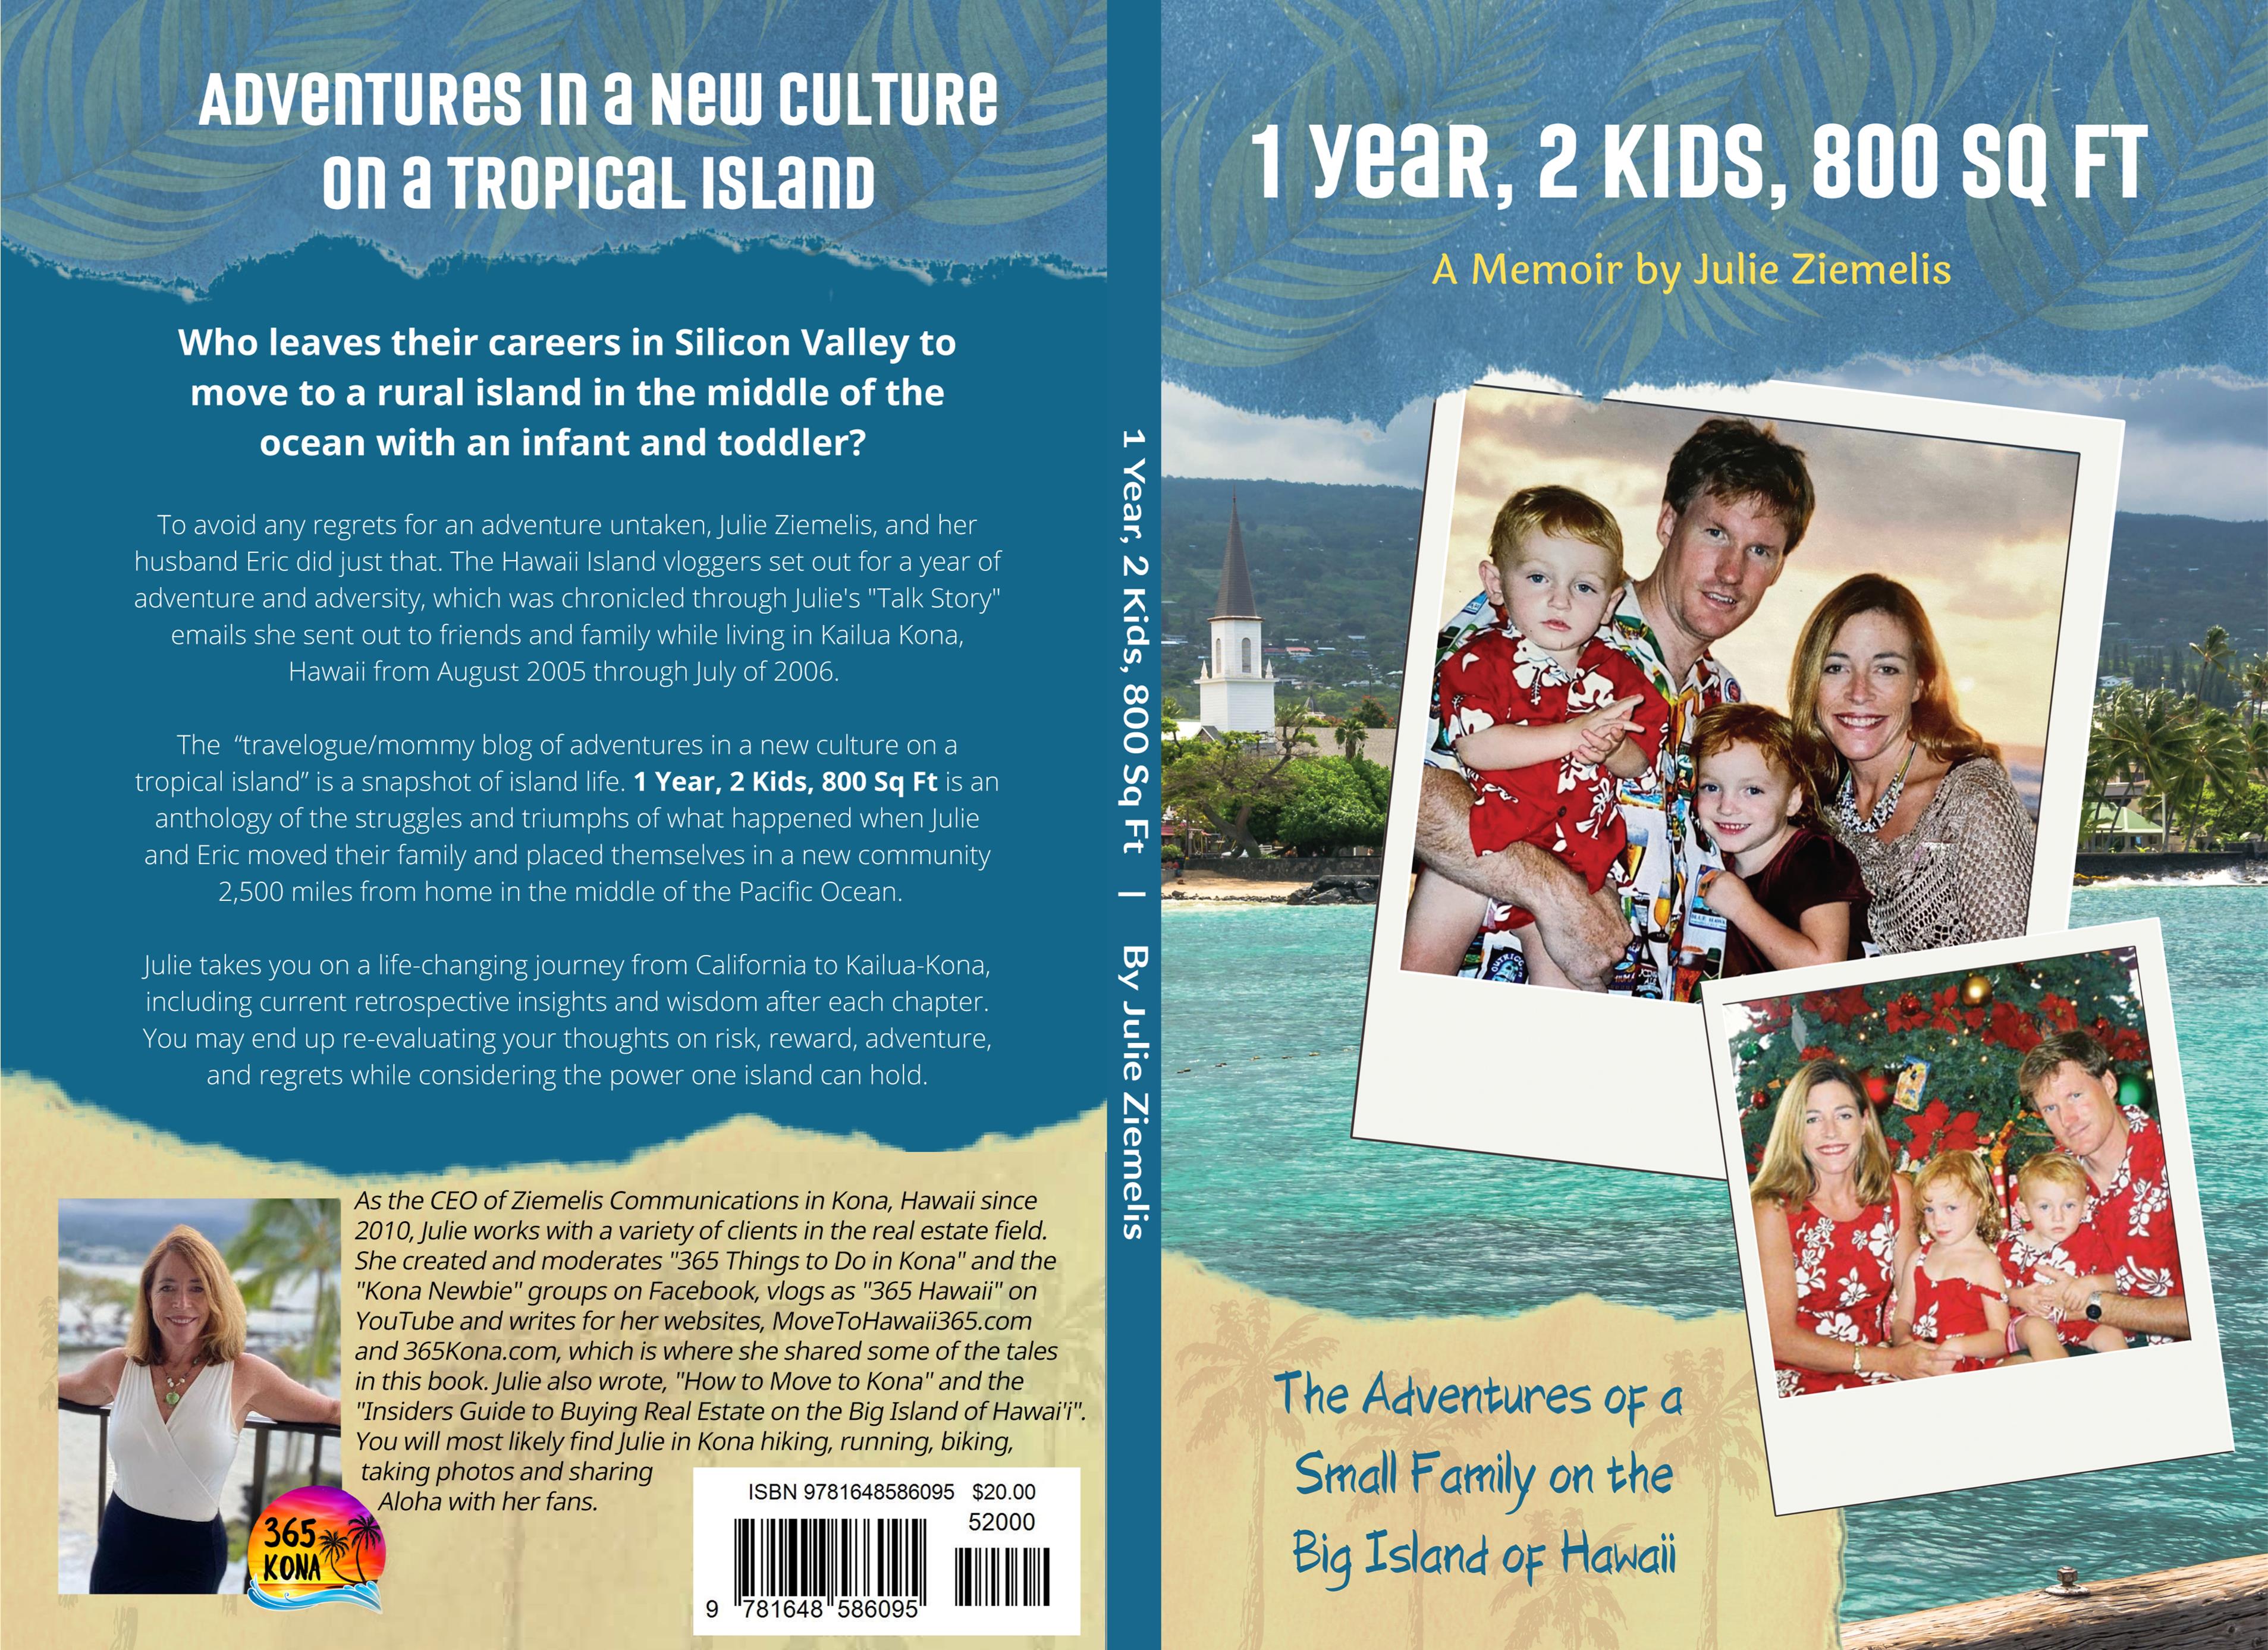 1 Year, 2 Kids,  800 Sq Ft-Adventures of a Small Family on the Big Island of Hawaii  cover image